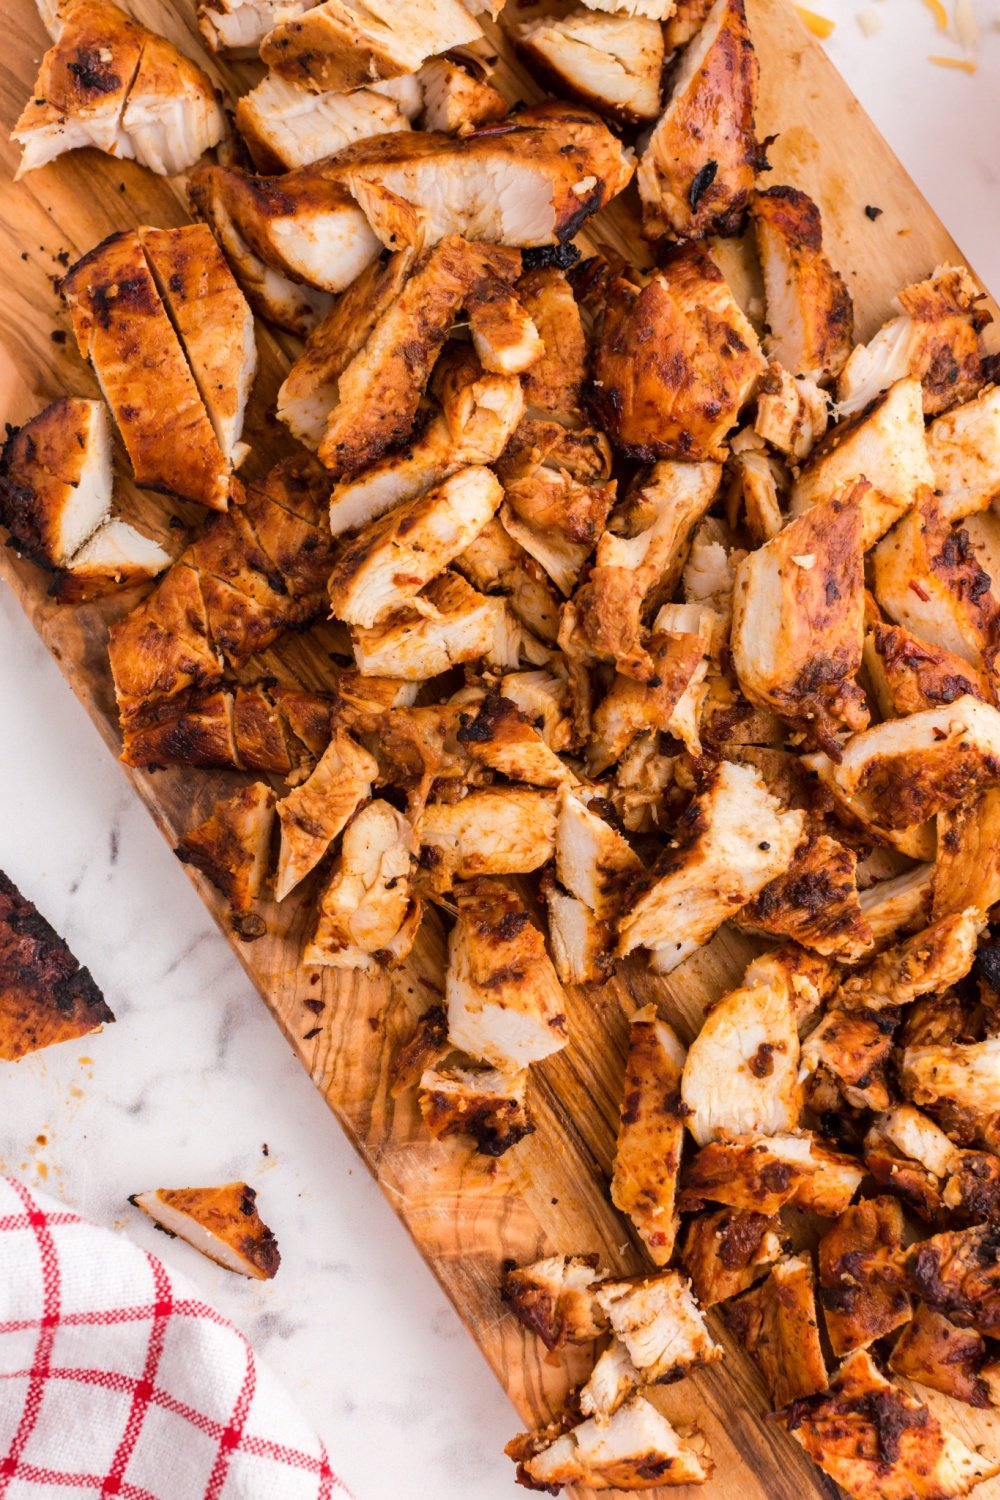 Chipotle Chicken cut up on a cutting board